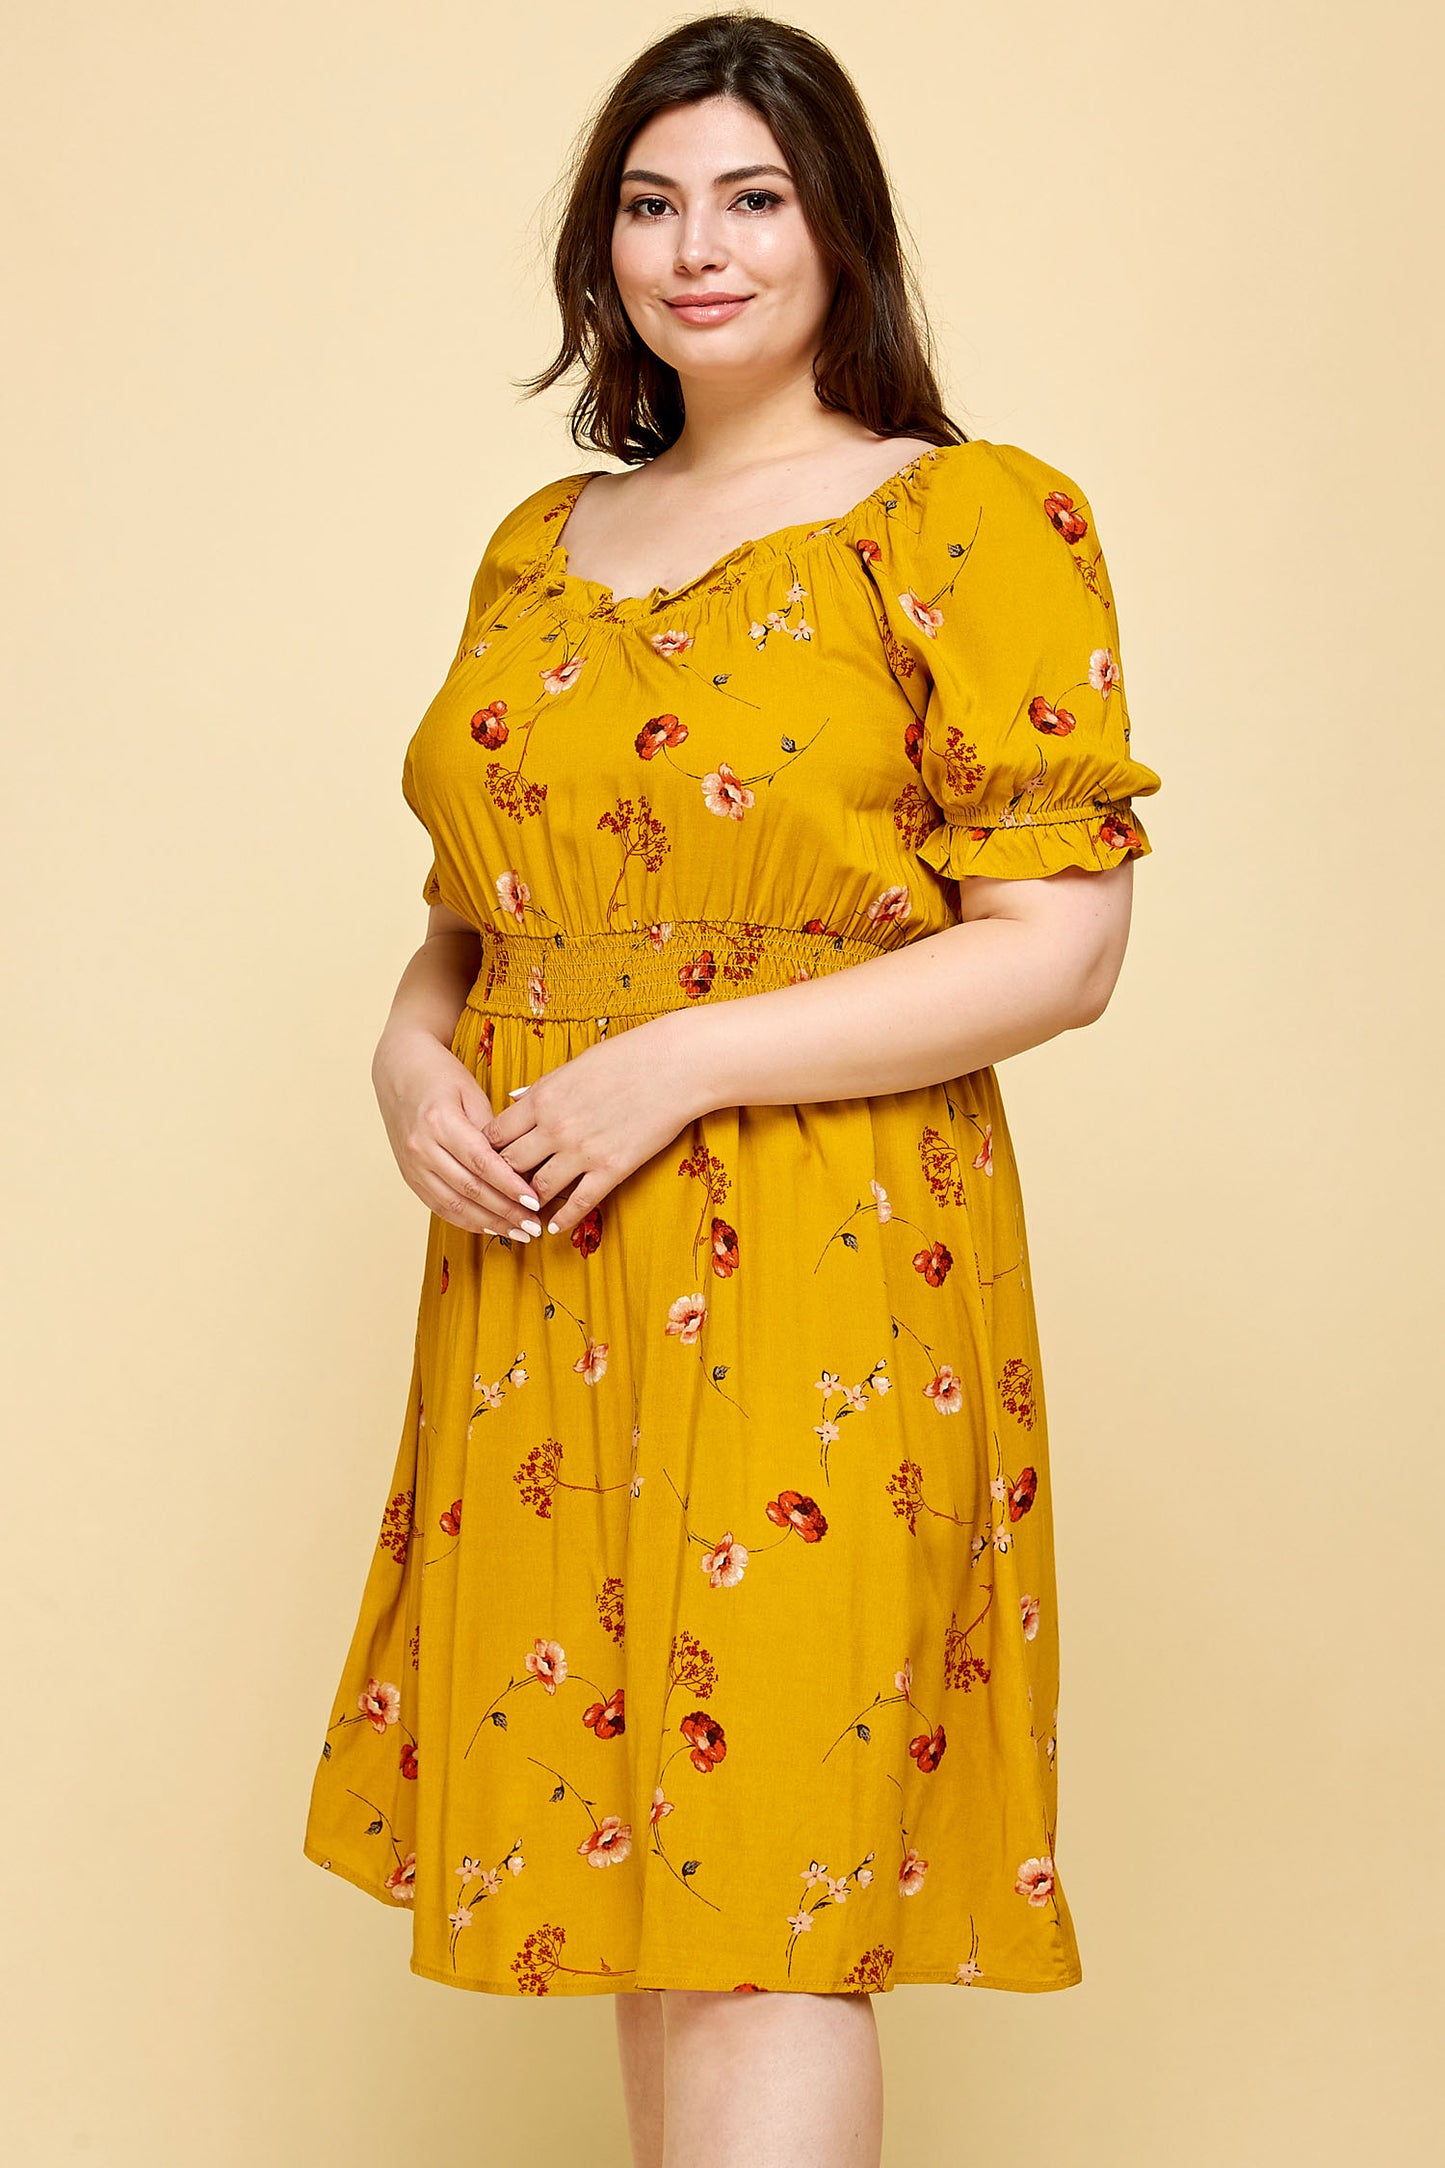 PLUS SIZE PEASANT SMOCKED WAIST DRESS IN YELLOW